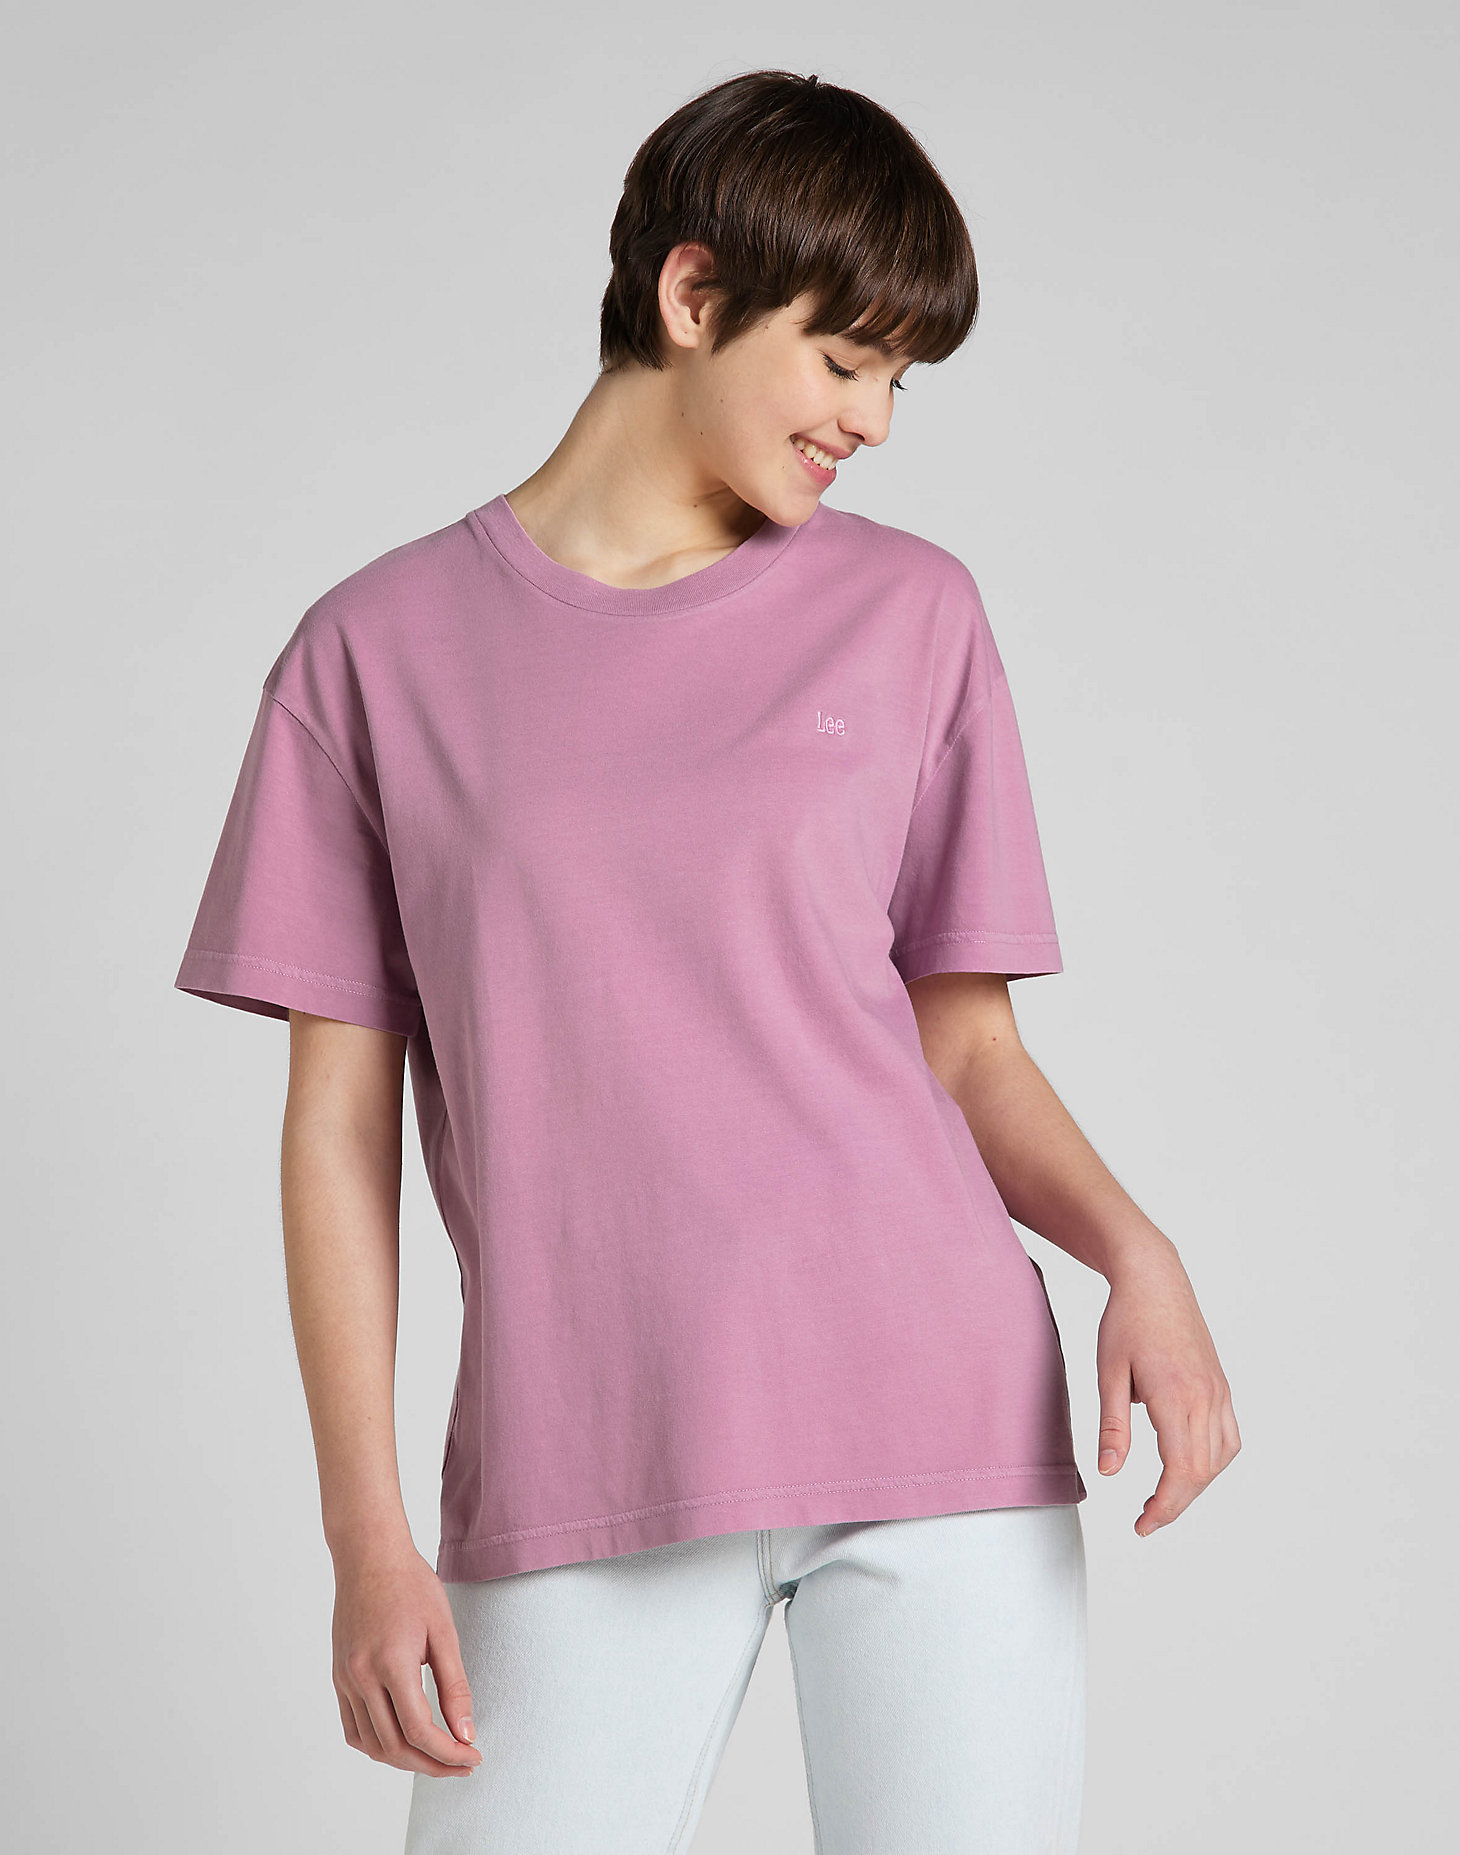 Plain Crew Neck Tee in Pansy main view